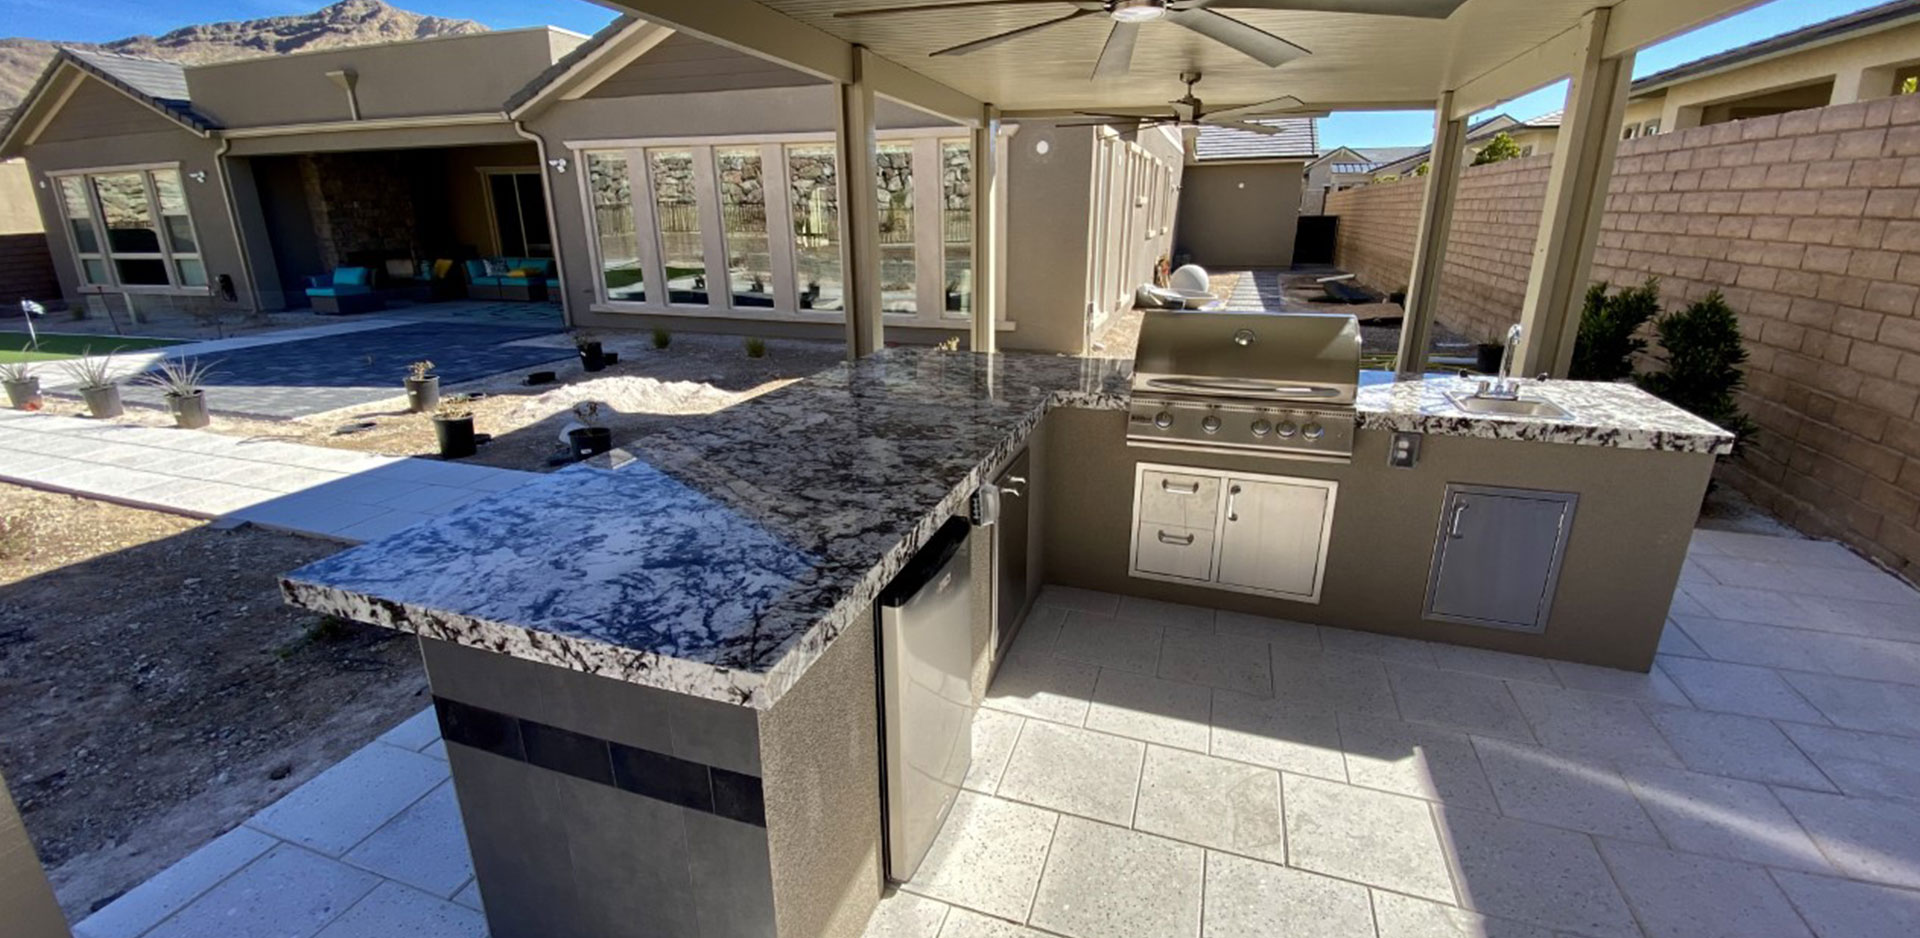 A large outdoor kitchen with an umbrella over the grill.